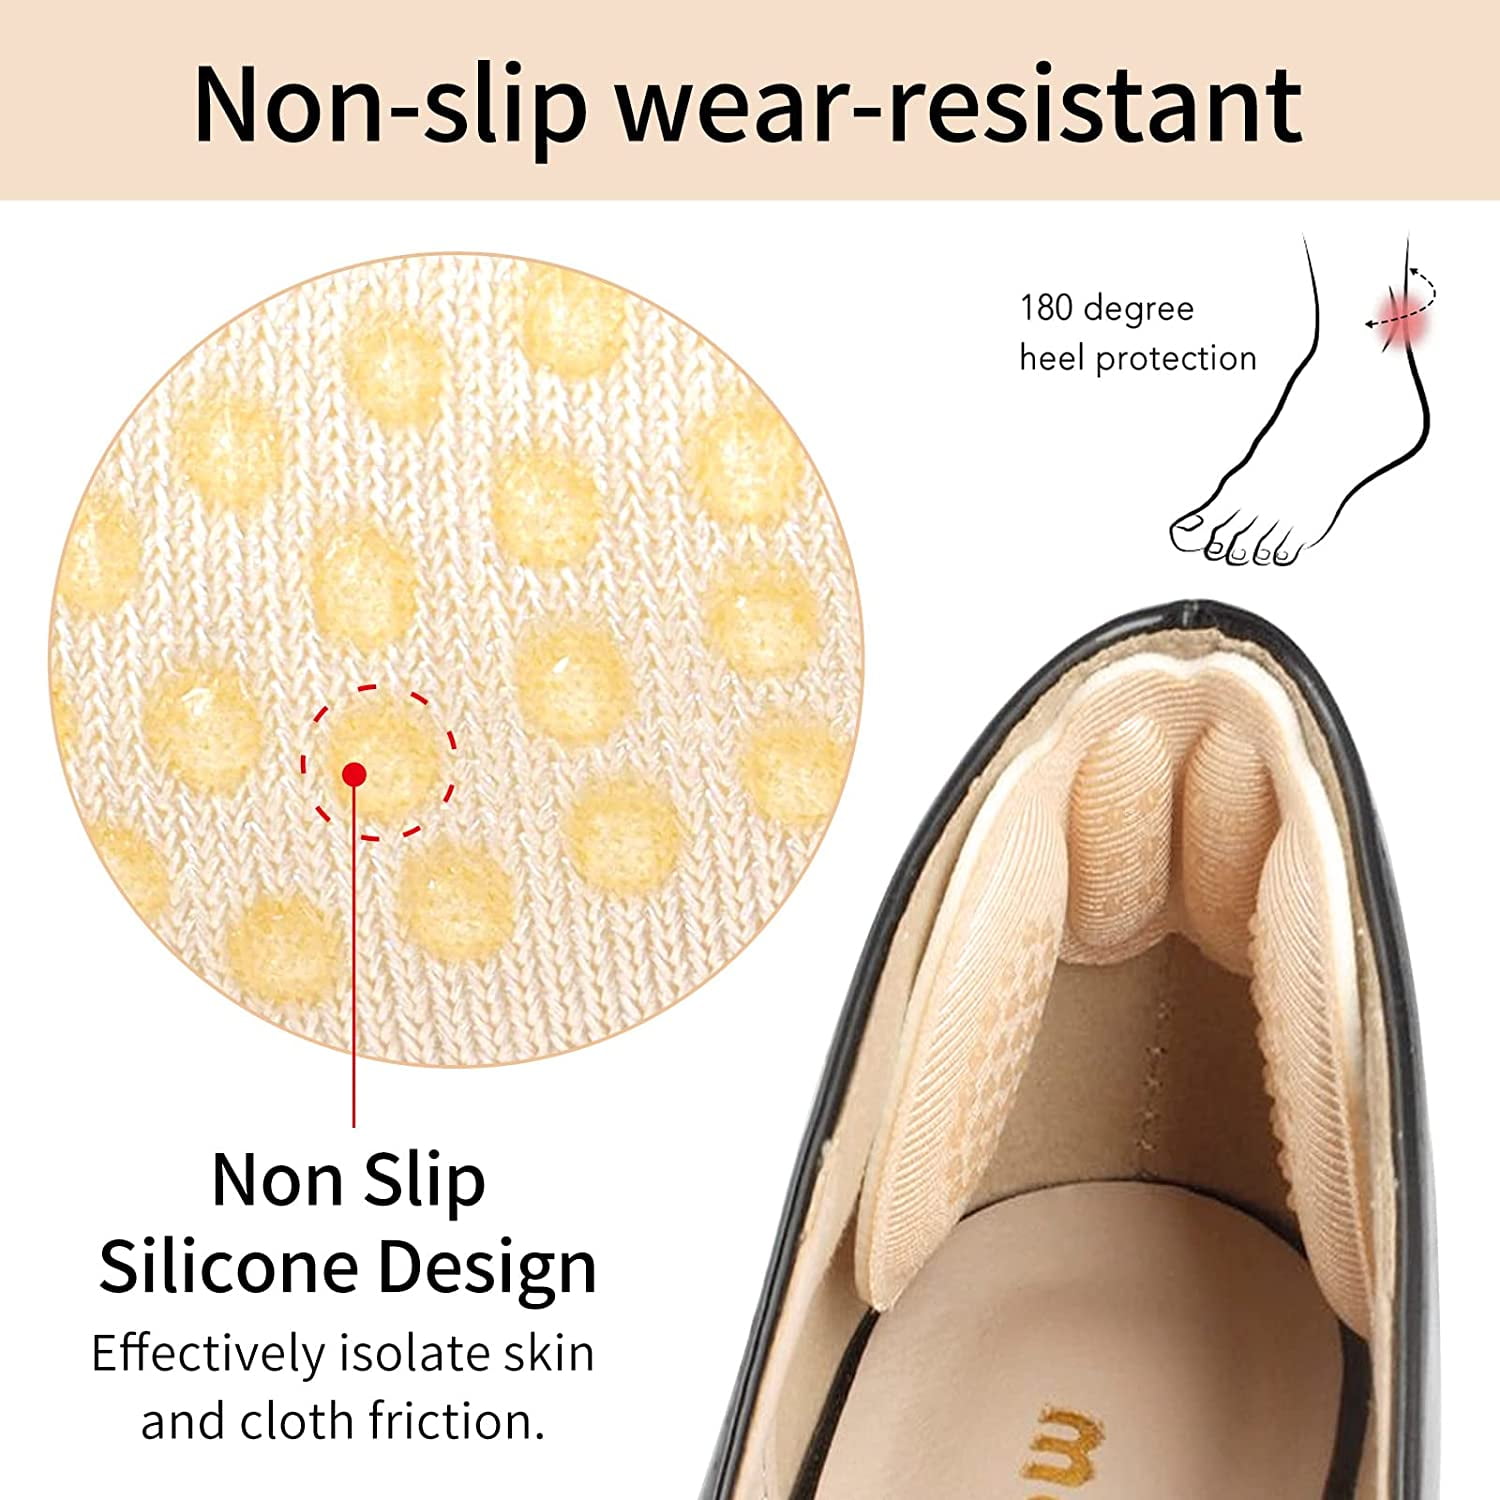 Shoe Heel Repair, One House 4 Pairs Self-Adhesive Inside Shoe Patches for  Holes, Shoe Hole Repair Patch Kit for Sneaker, Leather Shoes, High Heels -  Walmart.com